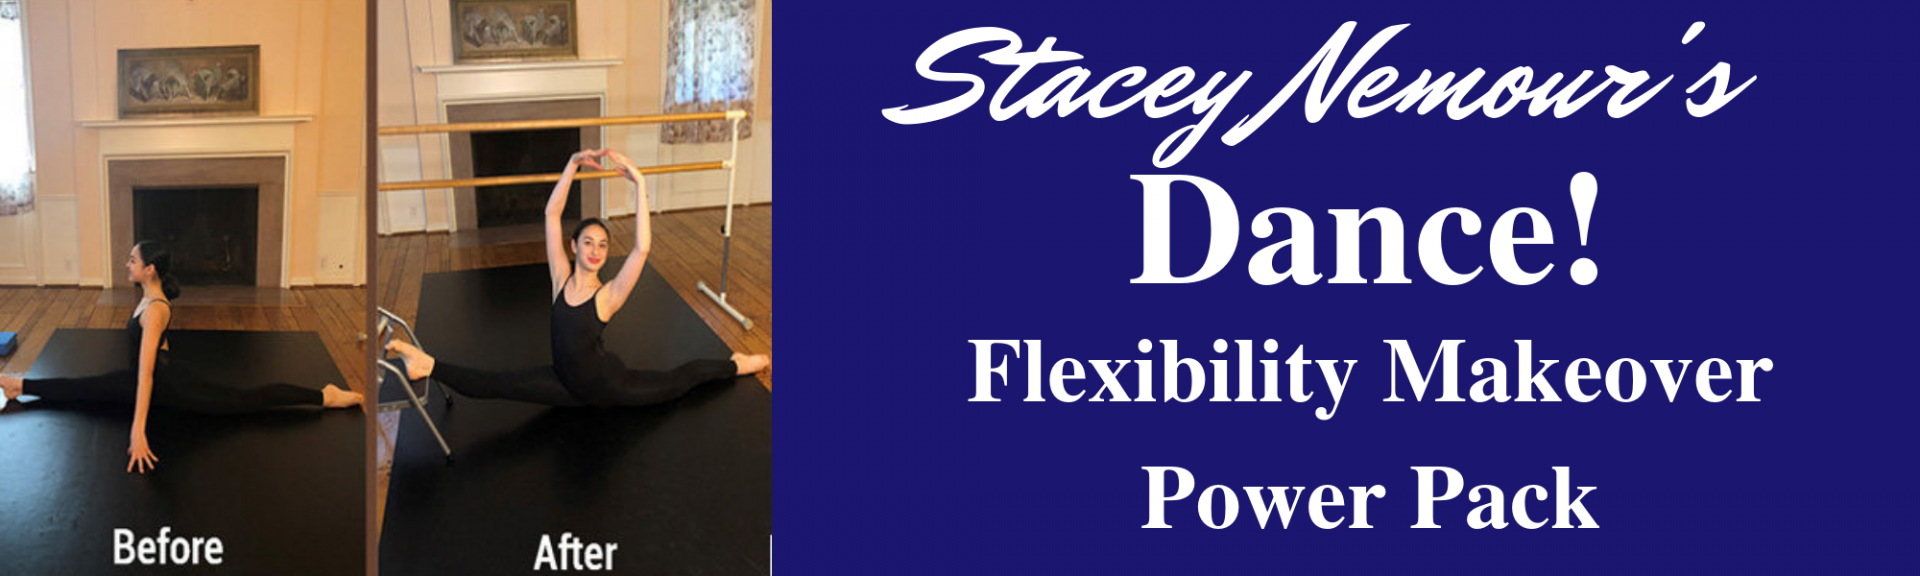 Dance! Flexibility Makeover Power Pack Course Card. ballet dancer able to do over-splits in after photo